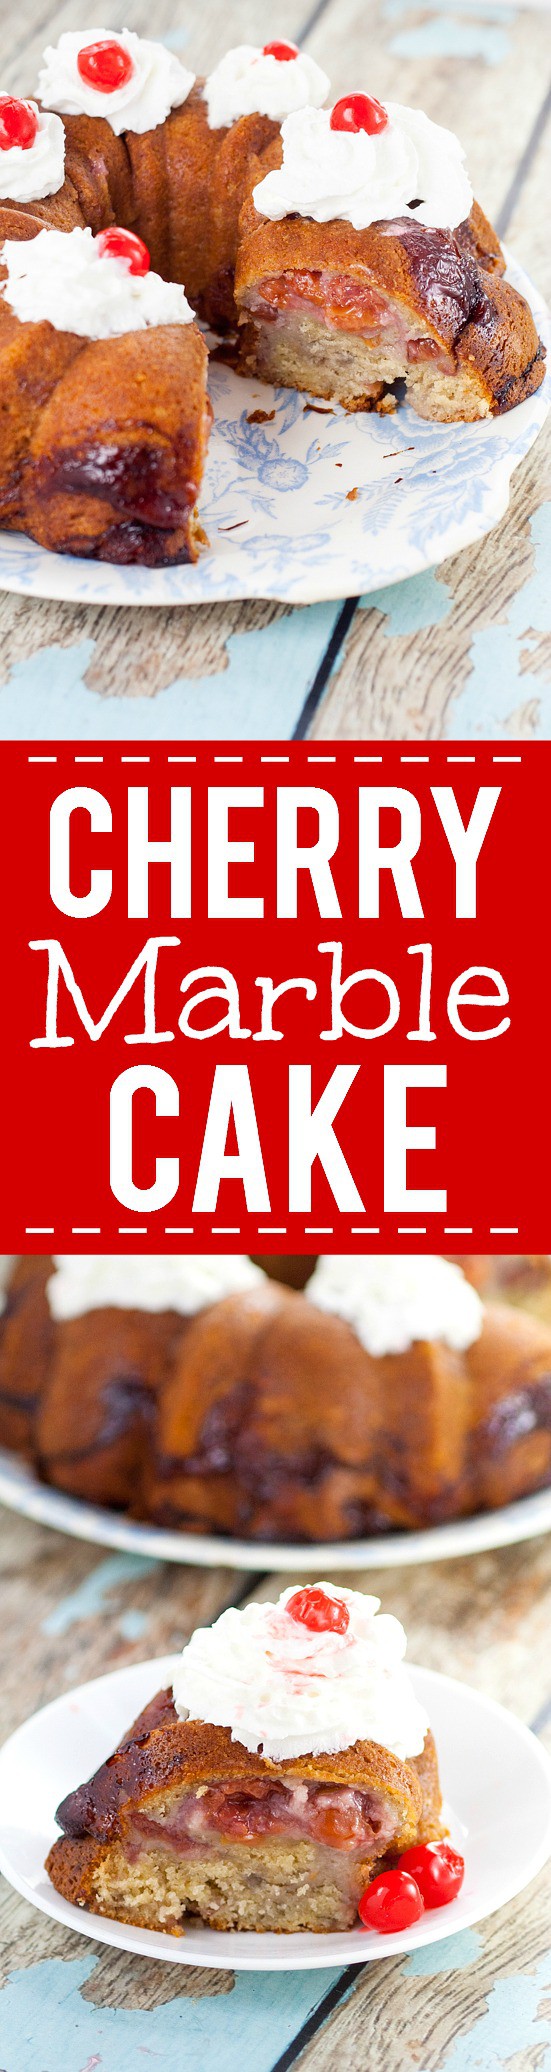 Cherry Marble Cake Recipe - Simple and quick prep, this pretty and sweet Cherry Marble Cake recipe tastes like pound cake with a fresh swirl of tangy cherries. Top with whipped cream & cherry.